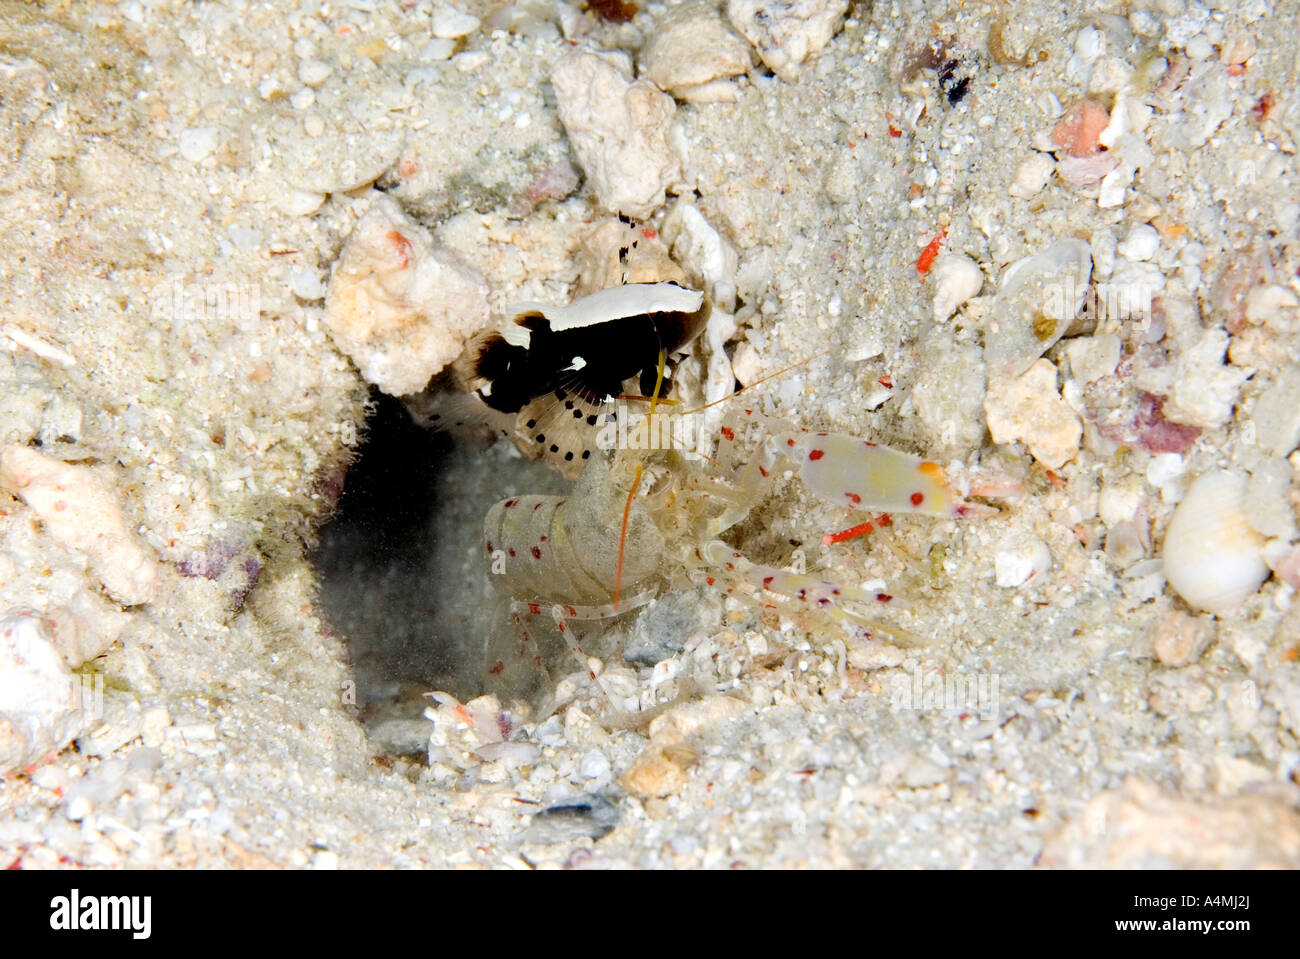 White Cap Shrimp Goby, Lotilia gracilosa living in a symbiotic relationship with a Red-spotted Goby Shrimp, Alpheus rubromaculatus, Stock Photo